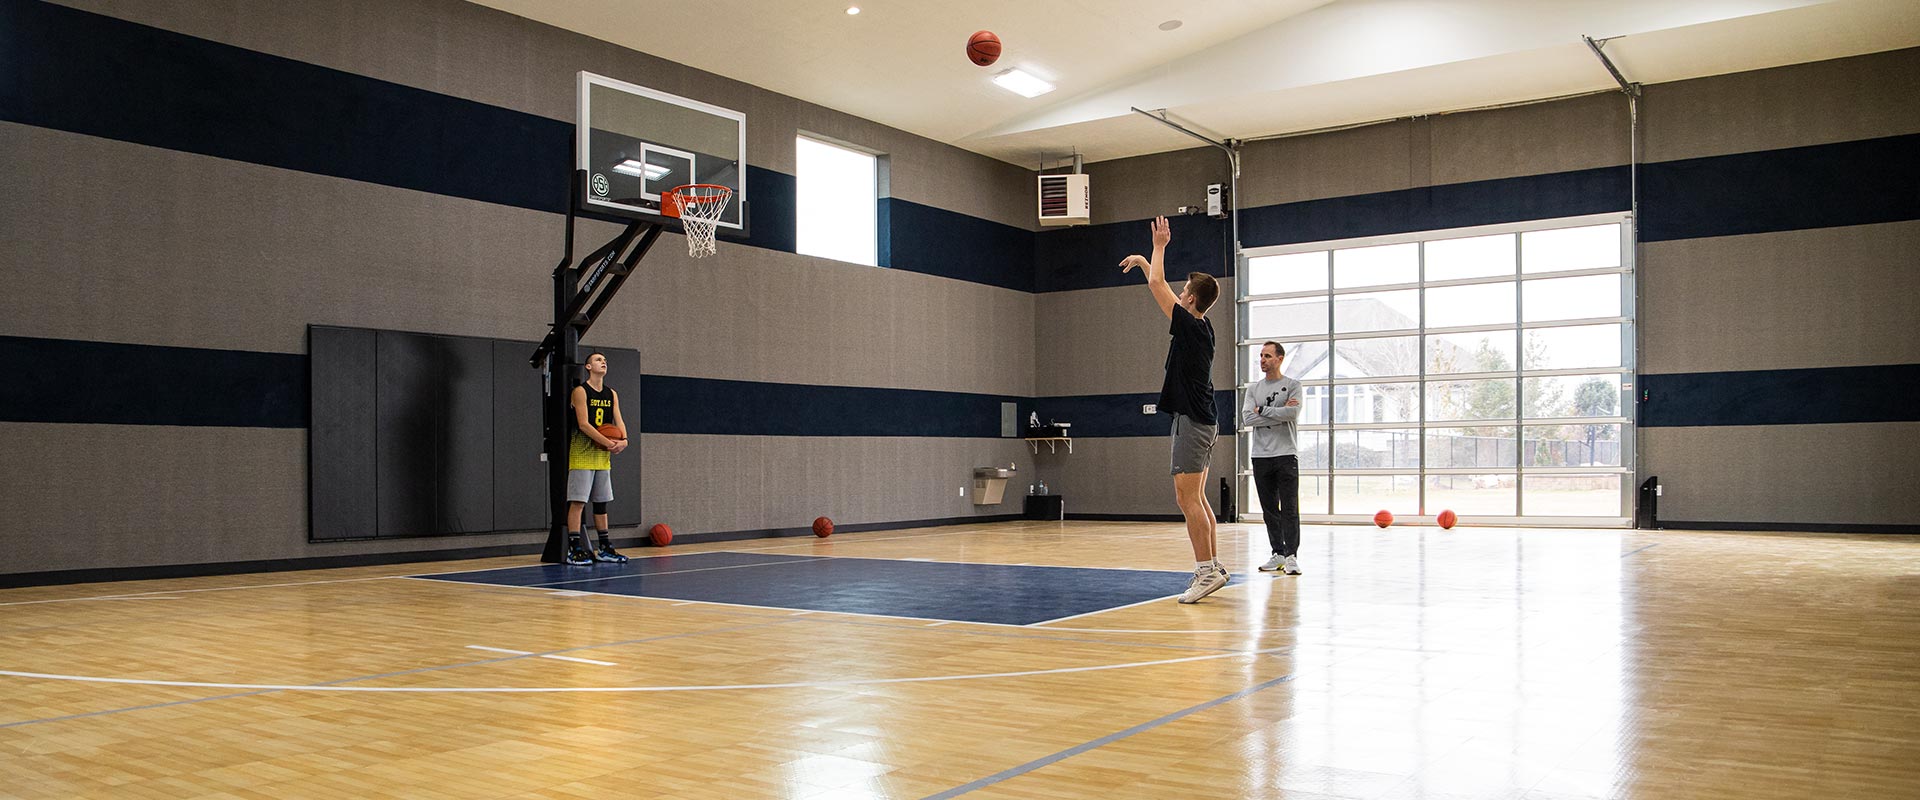 Father and sons practice drills on their indoor basketball court